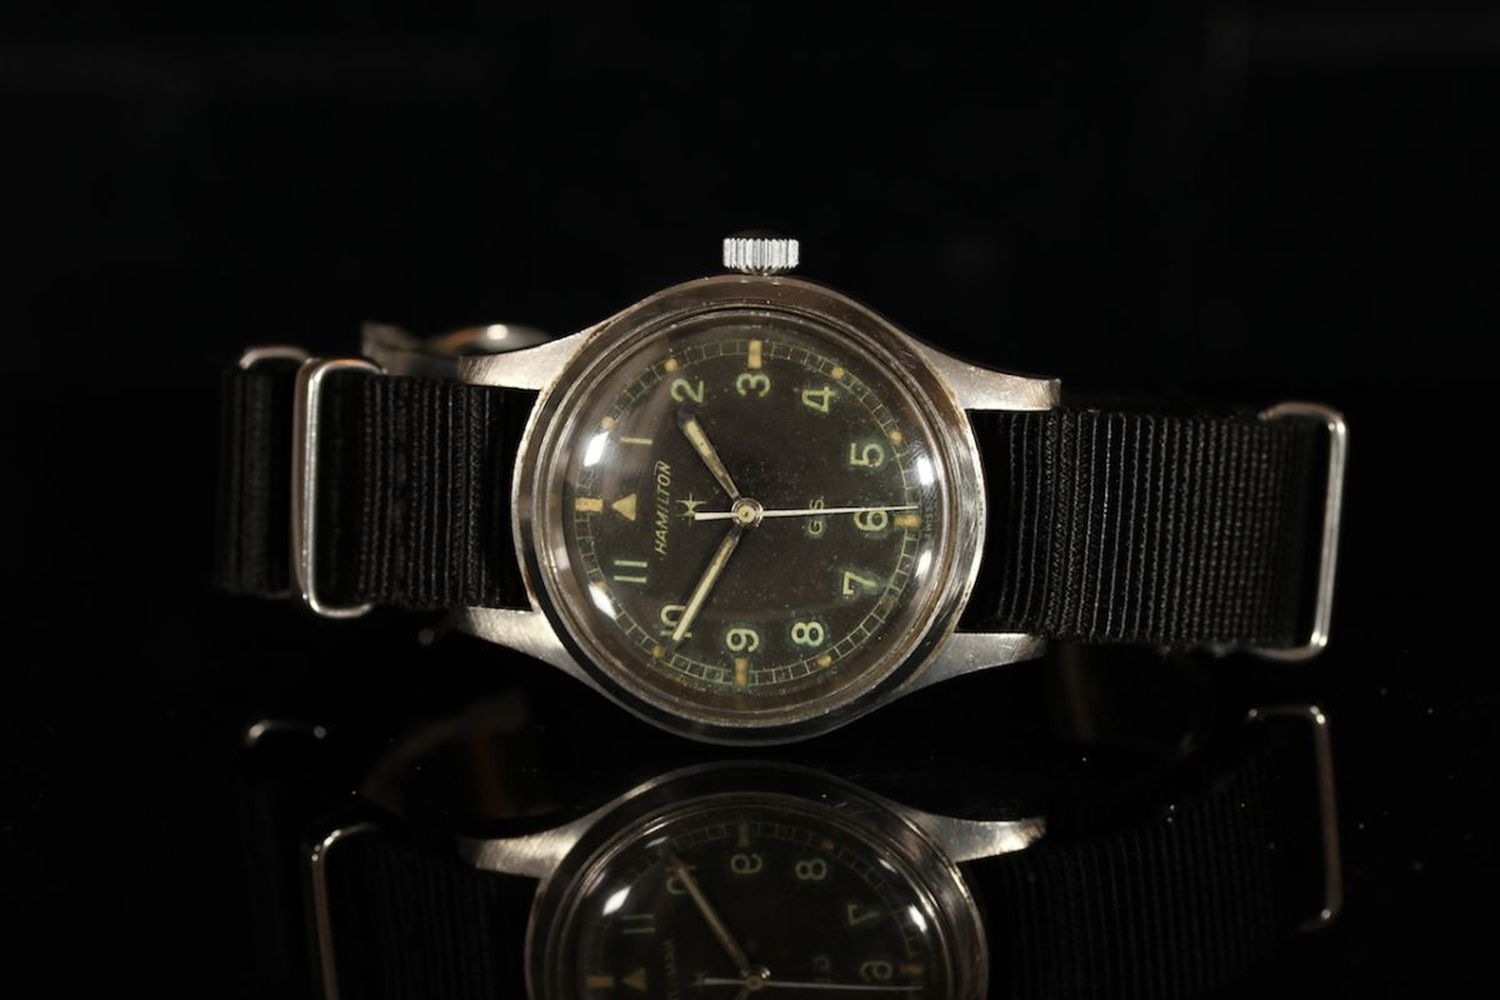 GENTLEMENS HAMILTON G.S. TROPICALIZED WRISTWATCH REF. 1 680 984, circular patina black dial with